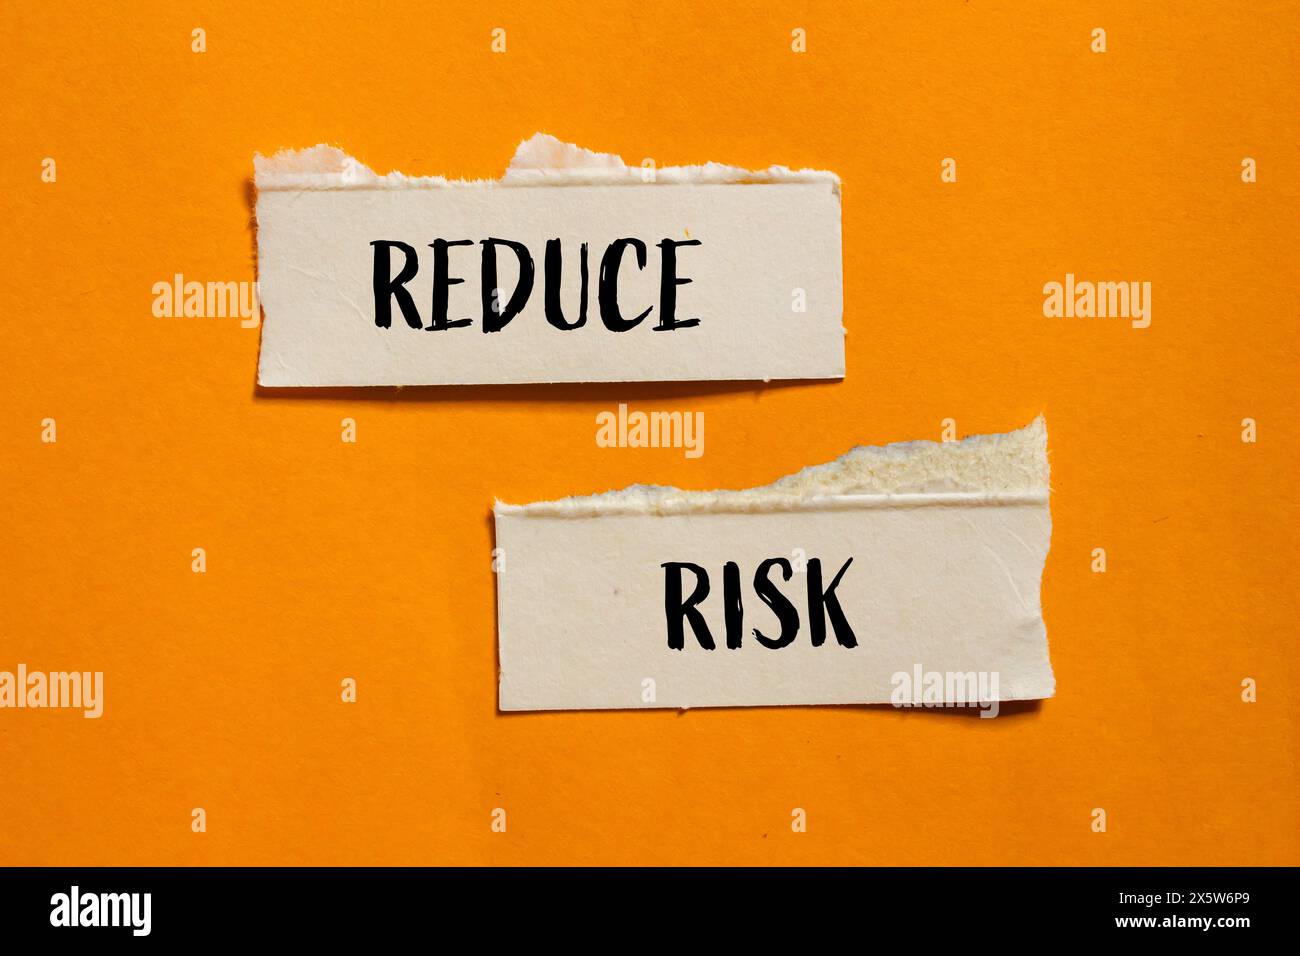 Reduce risk words written on ripped paper pieces with orange background. Conceptual reduce risk symbol. Copy space. Stock Photo